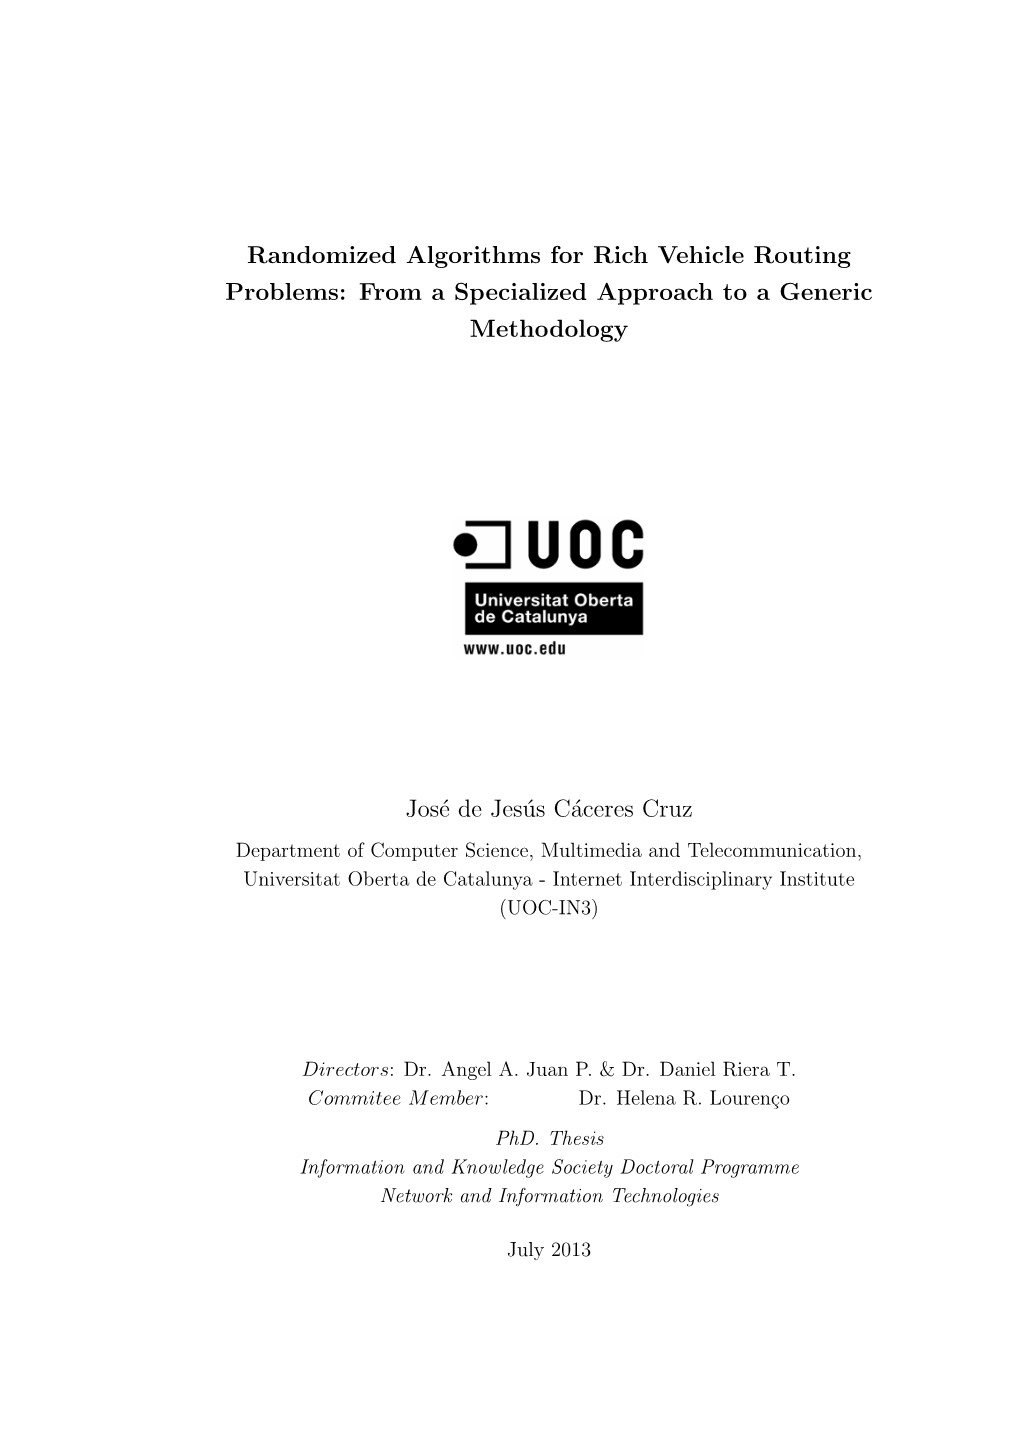 Rich Vehicle Routing: from a Set of Tailored Methods to a Generic